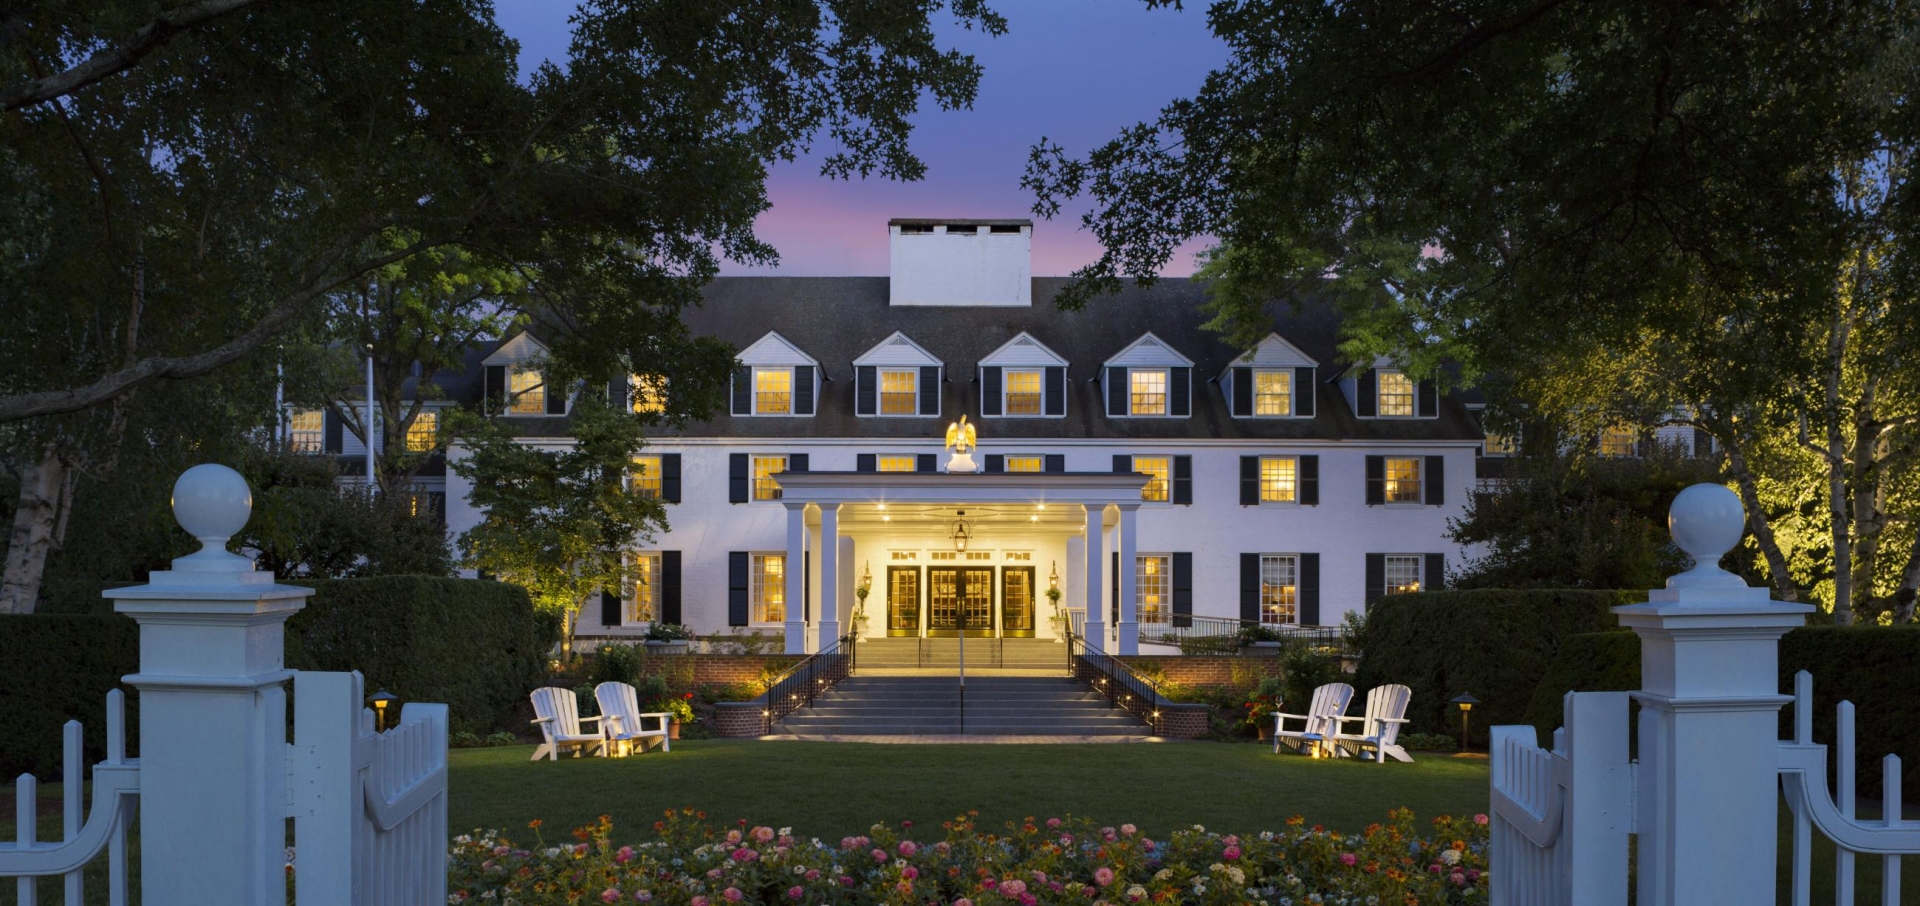 10 Oldest Hotels in the US - Top Historic Attractions